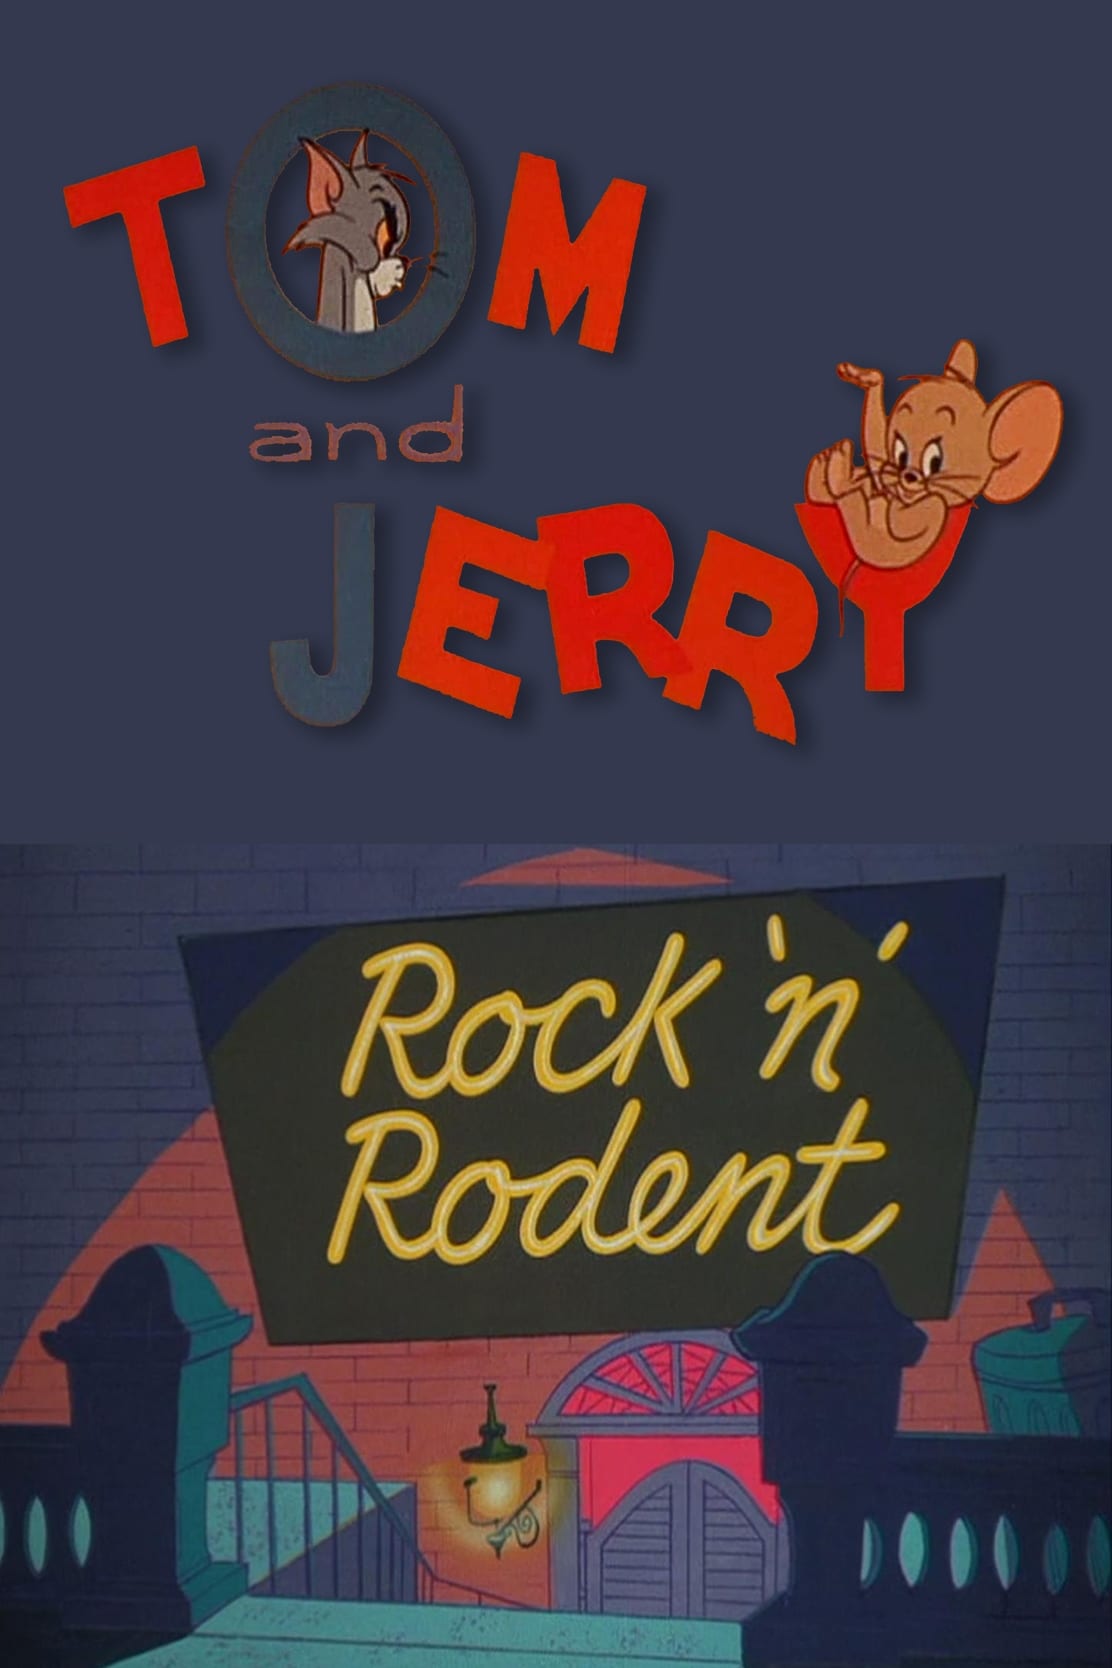 Rock 'n' Rodent (1967)